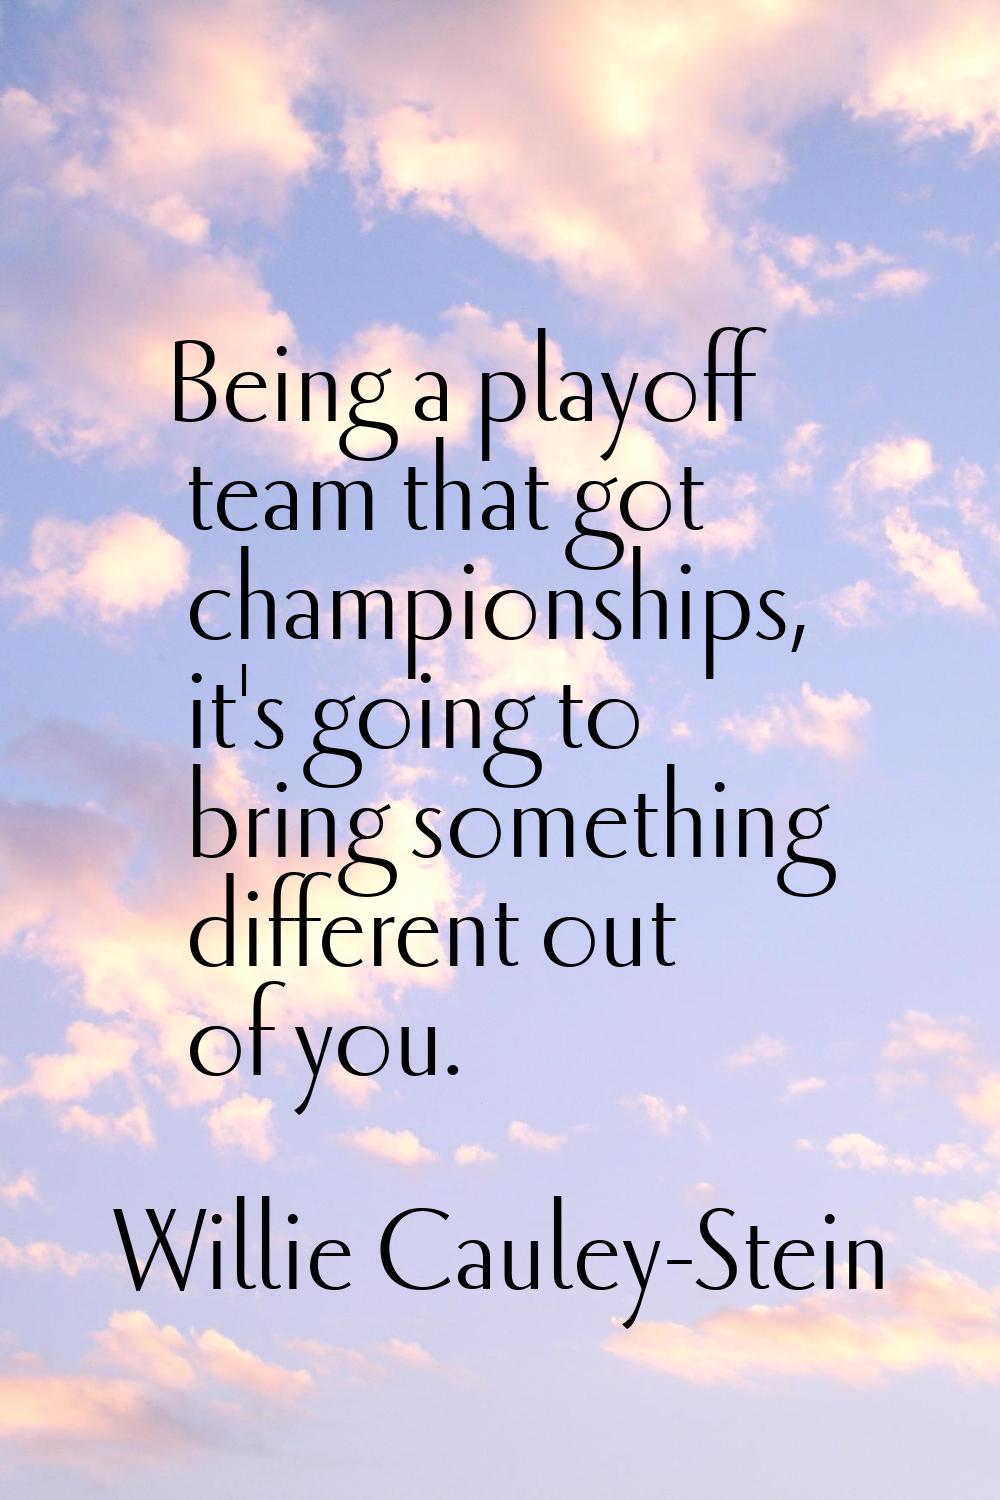 Being a playoff team that got championships, it's going to bring something different out of you.